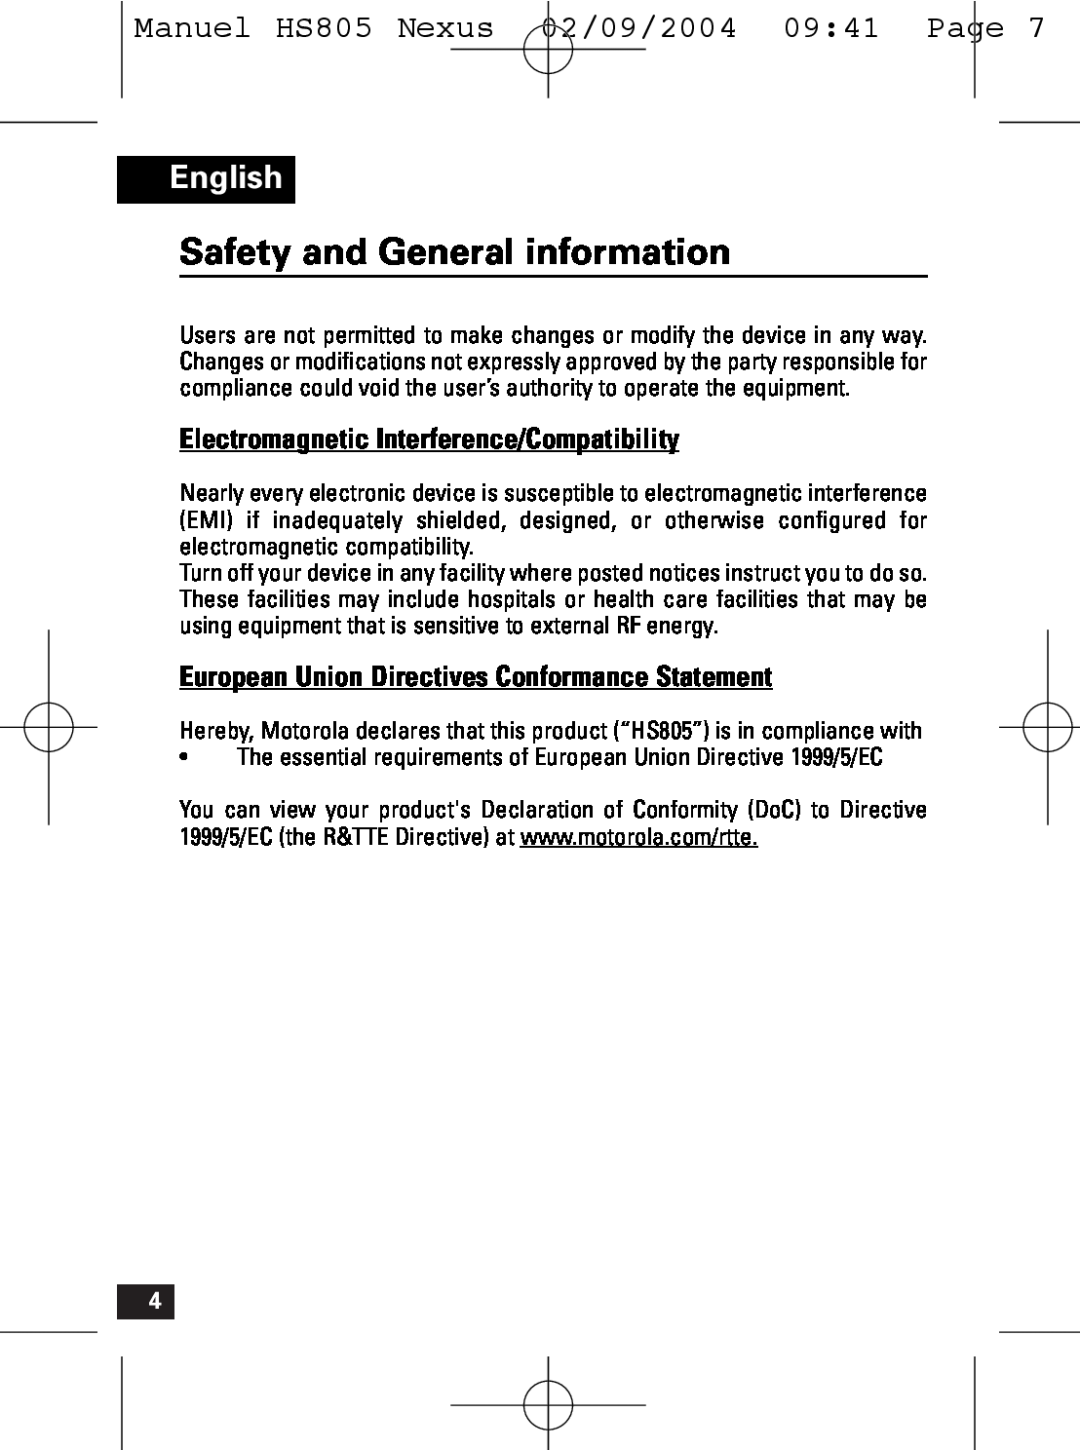 Motorola HS805 manual Safety and General information, Electromagnetic Interference/Compatibility, English 